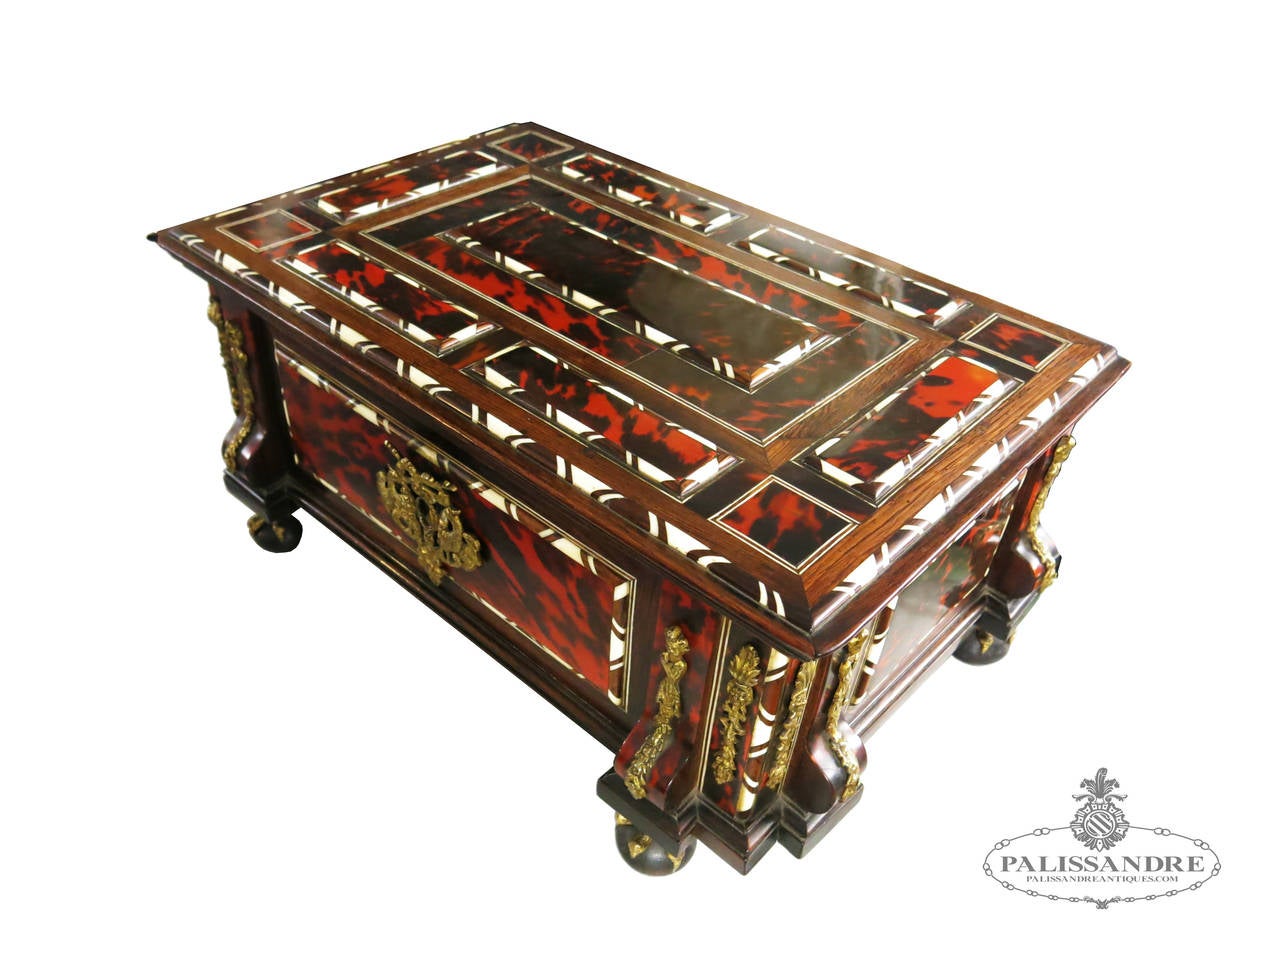 Gorgeous jewelry box of the late seventeenth century probably in northern Italy, covered whole rosewood and hawksbill. The corners are topped with anthropomorphic masks vertical scalloped gilt bronze. The shield lock occupies a very visible on the